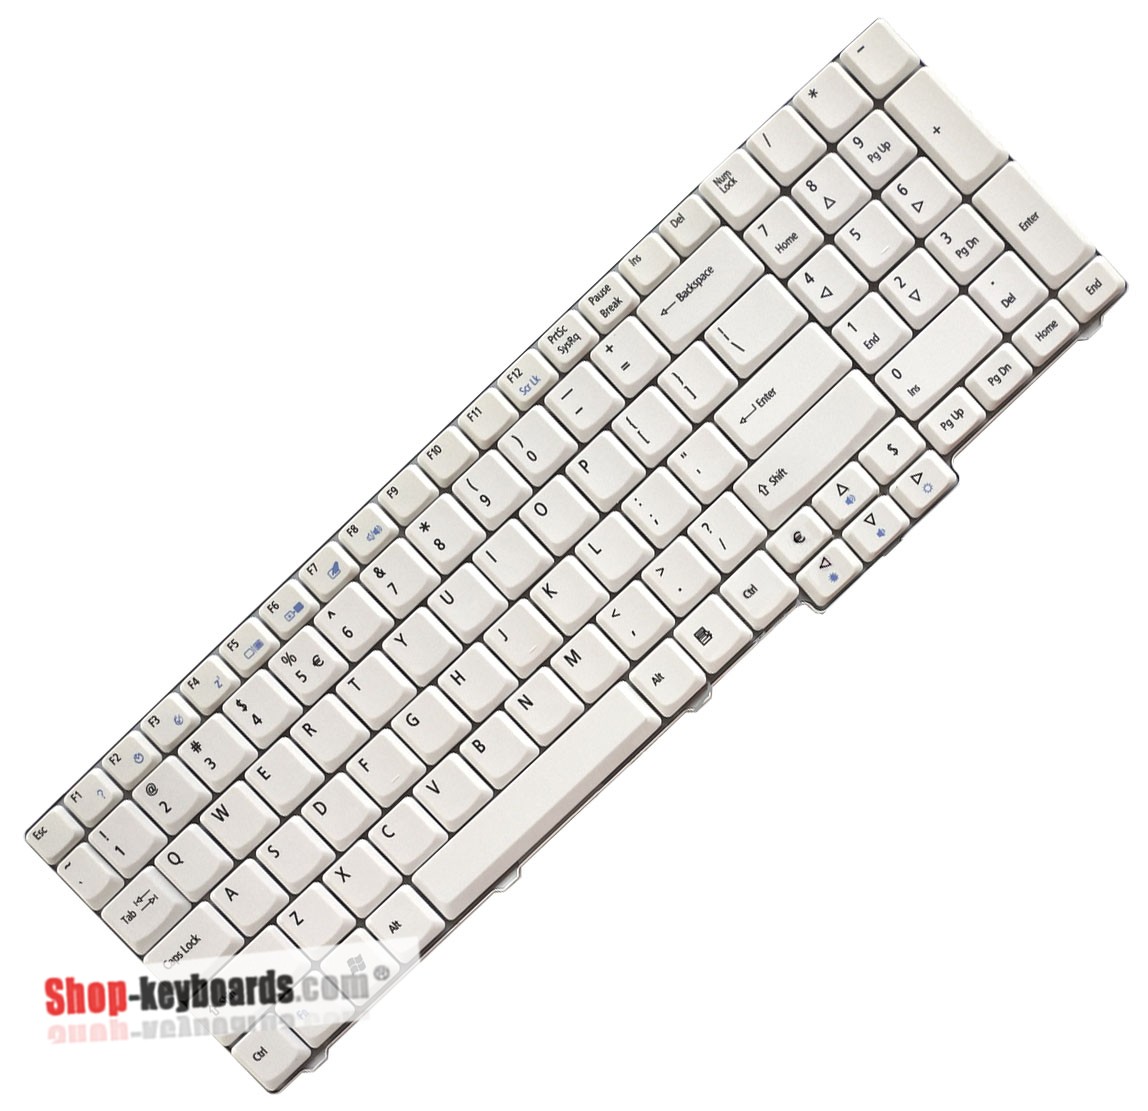 Acer Aspire 8730ZG-424G50MN Keyboard replacement